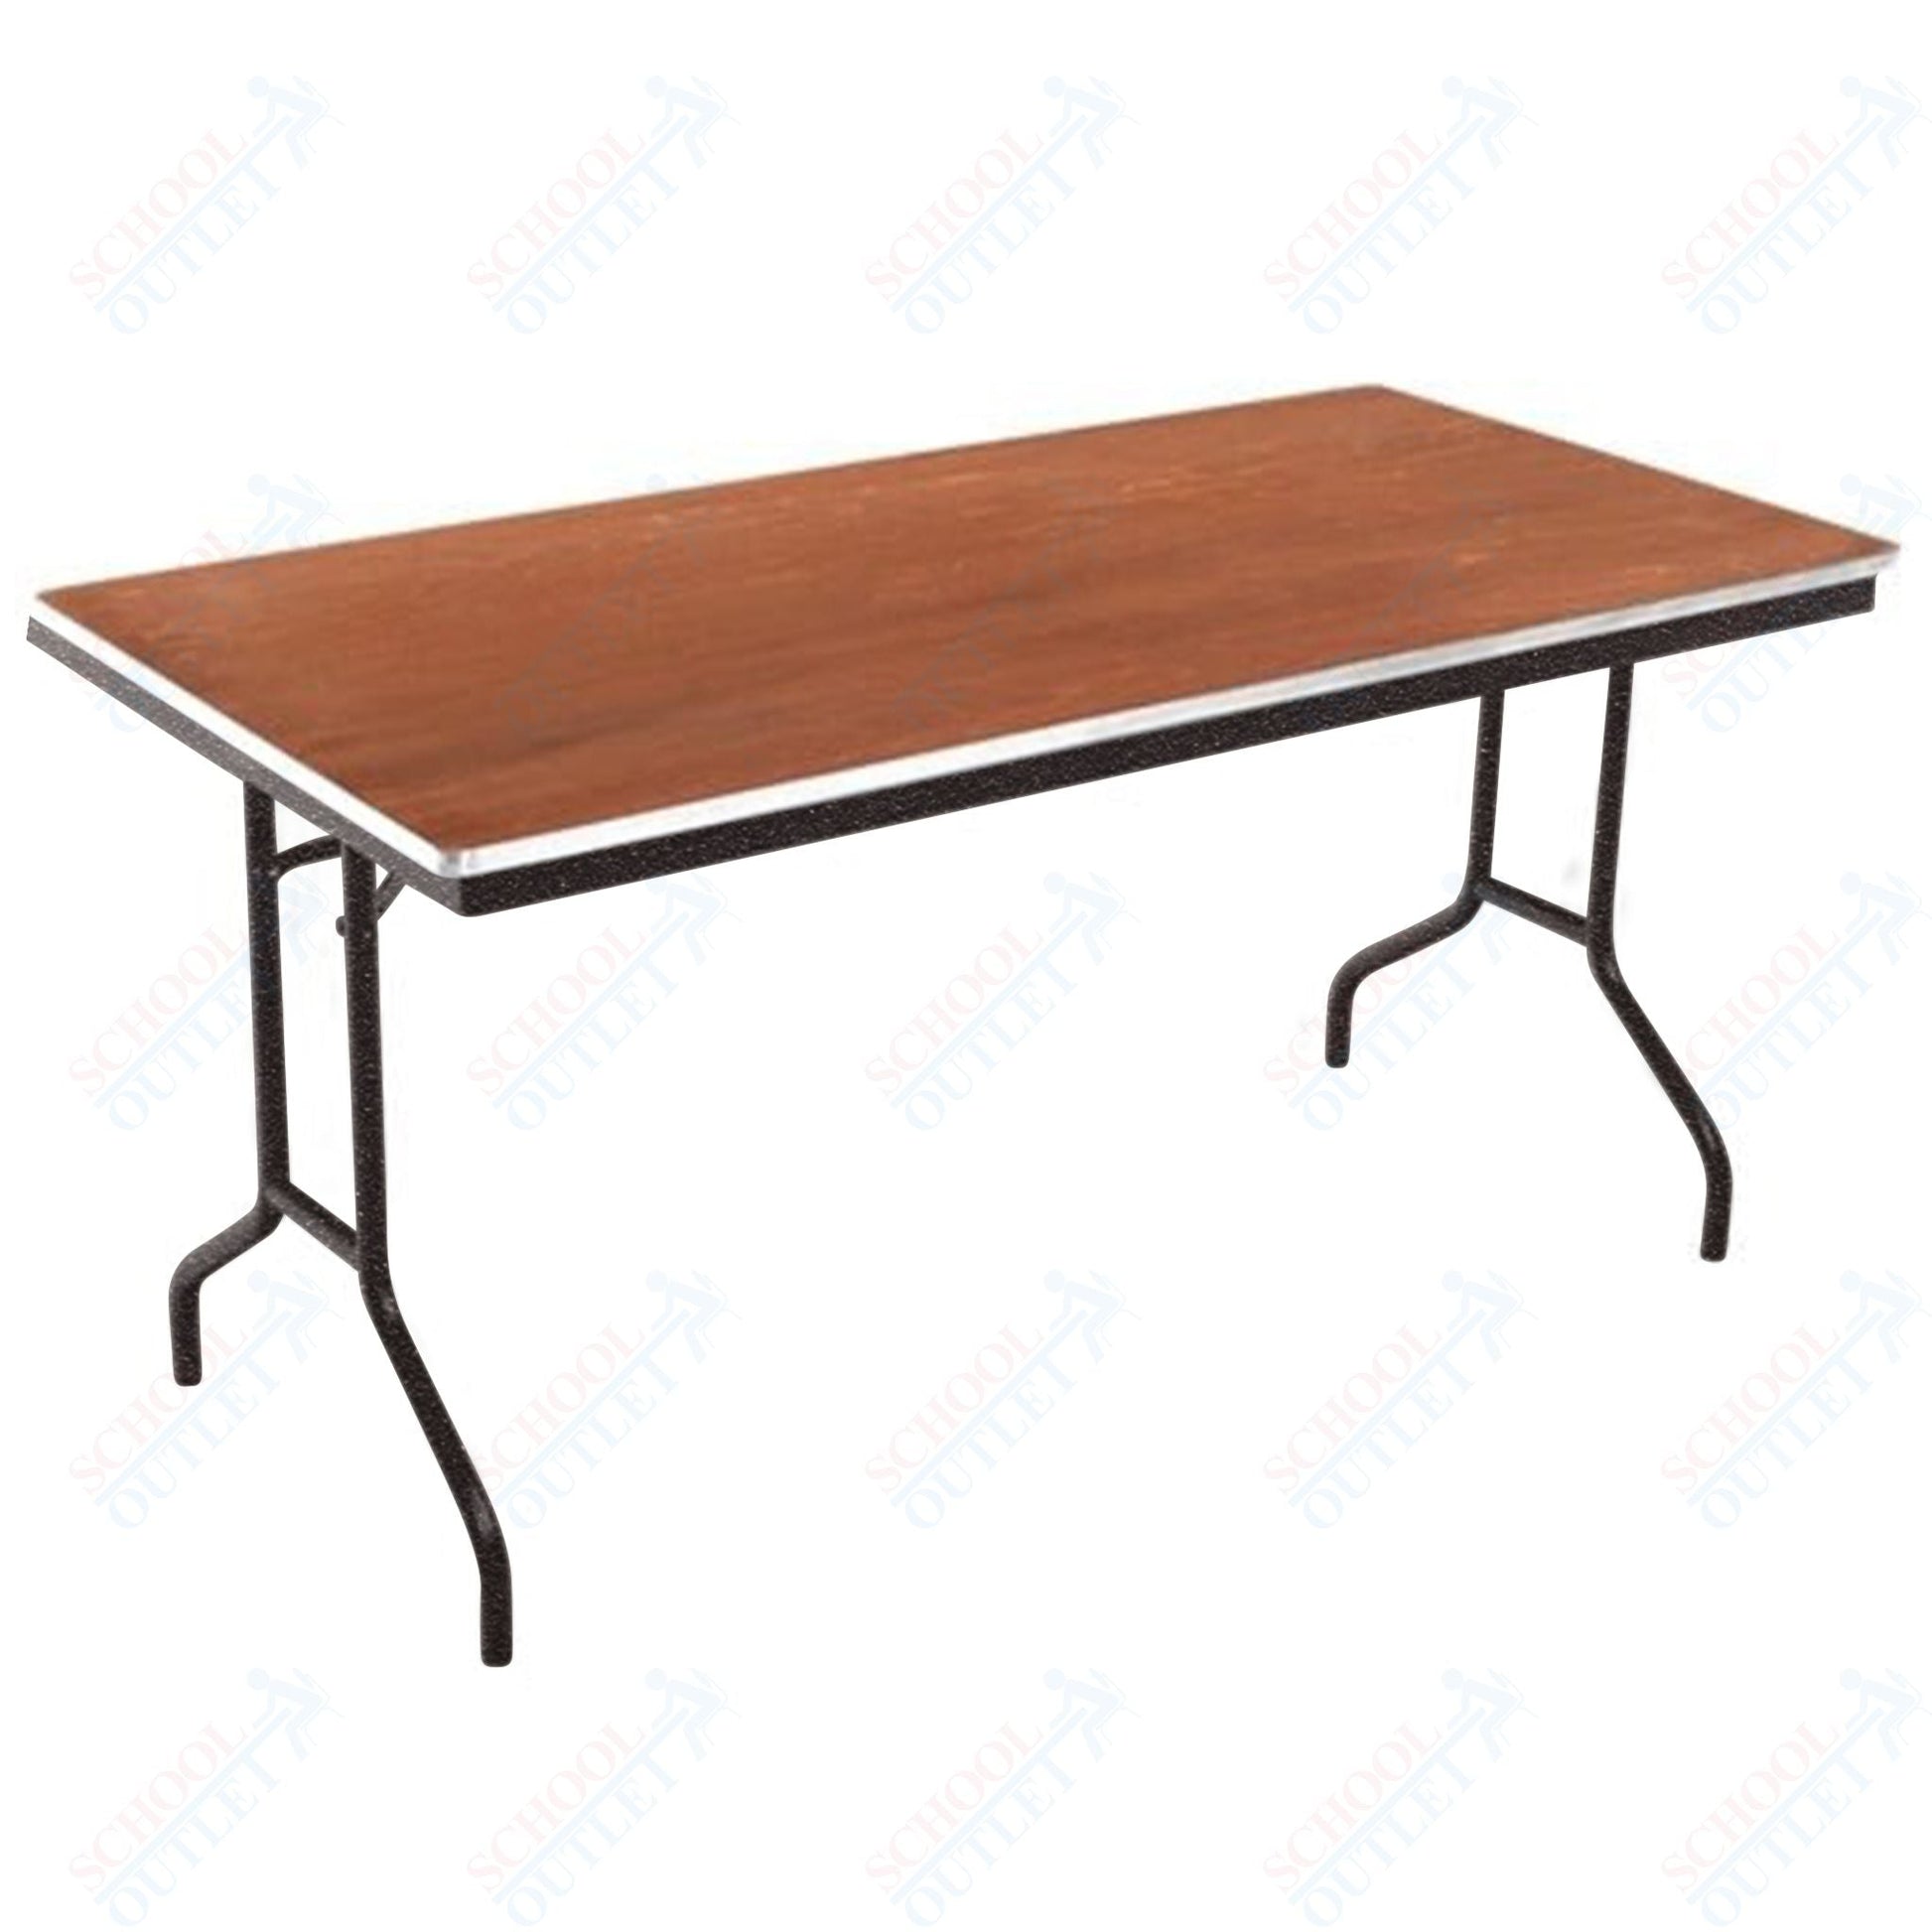 AmTab Folding Table - Plywood Stained and Sealed - Aluminum Edge - 18"W x 72"L x 29"H (AmTab AMT - 186PA) - SchoolOutlet